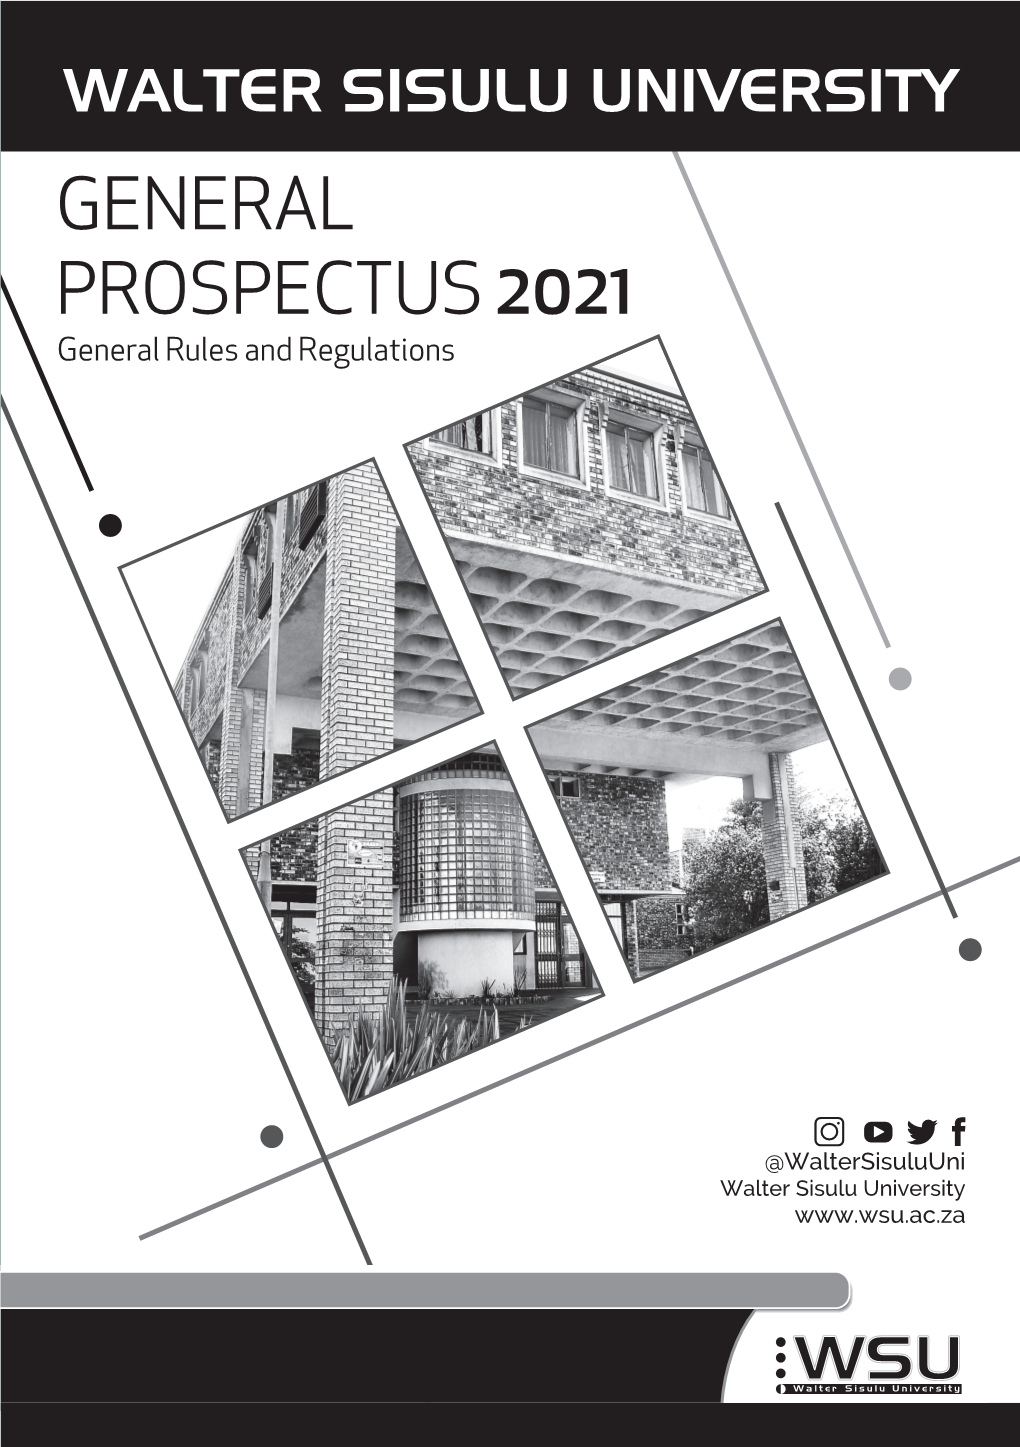 GENERAL PROSPECTUS 2021 General Rules and Regulations